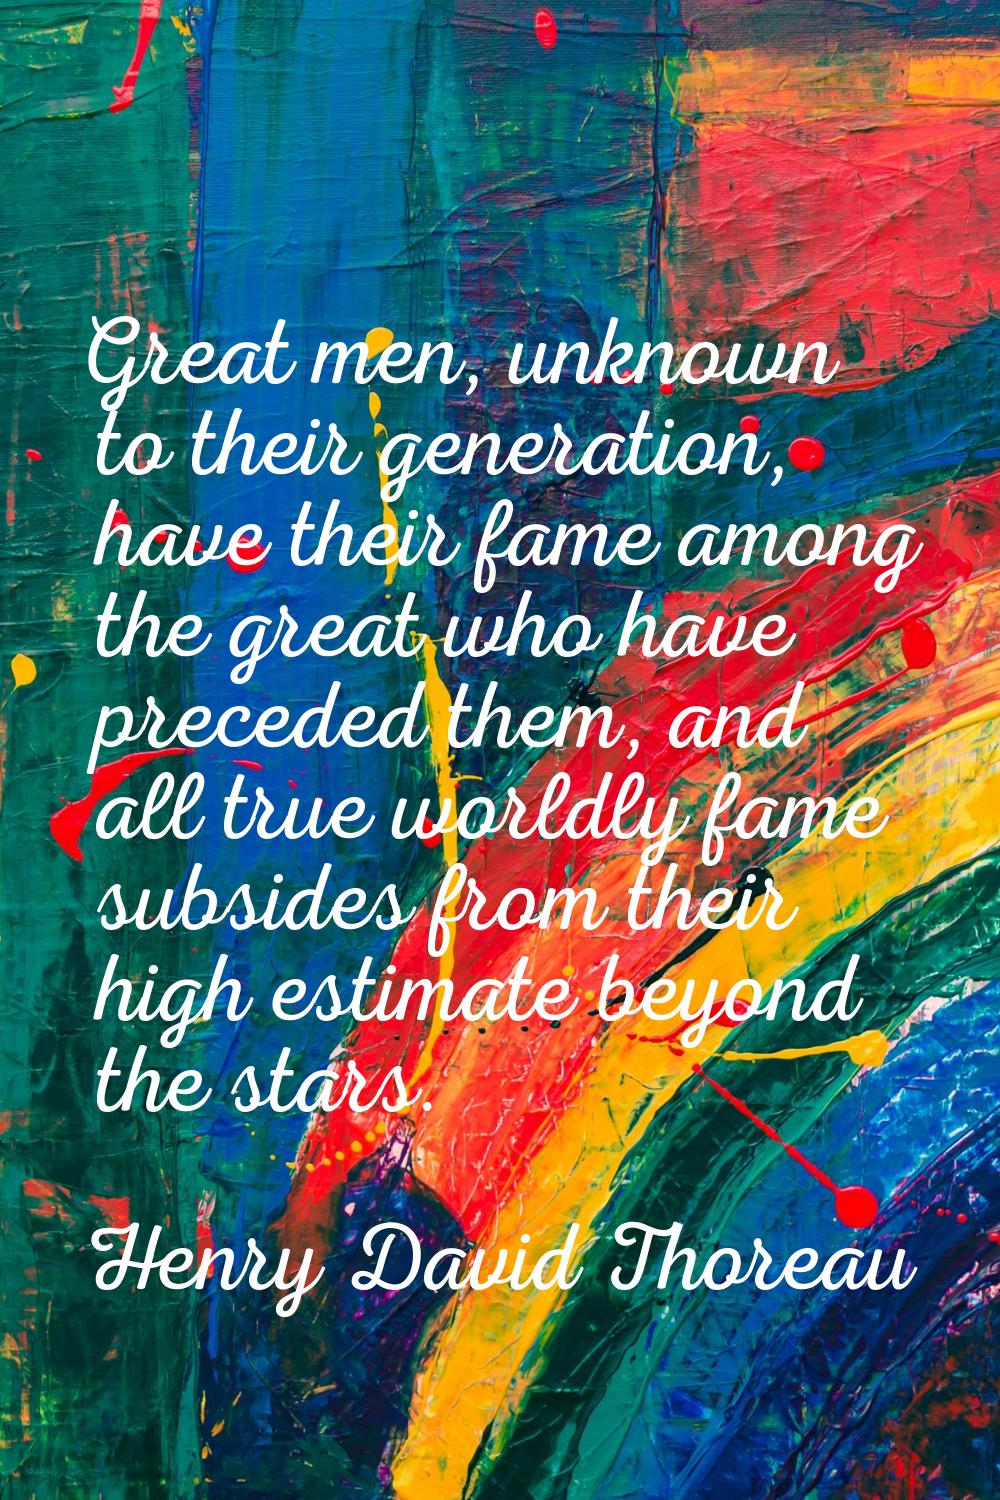 Great men, unknown to their generation, have their fame among the great who have preceded them, and